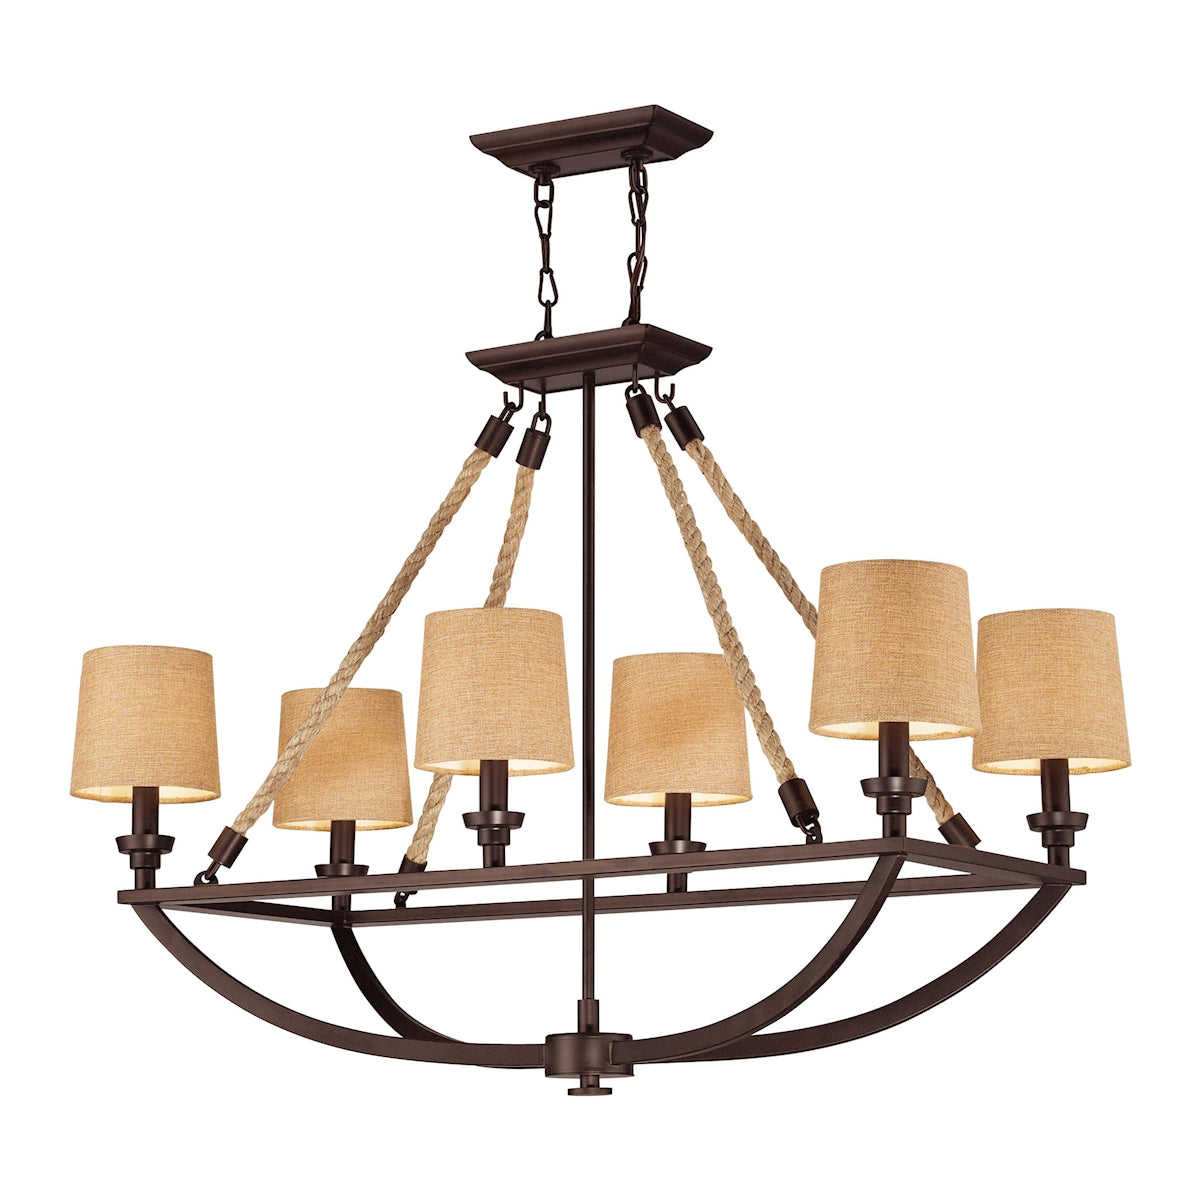 ELK Lighting 63019-6 Natural Rope 6-Light Linear Chandelier in Aged Bronze with Tan Linen Shades